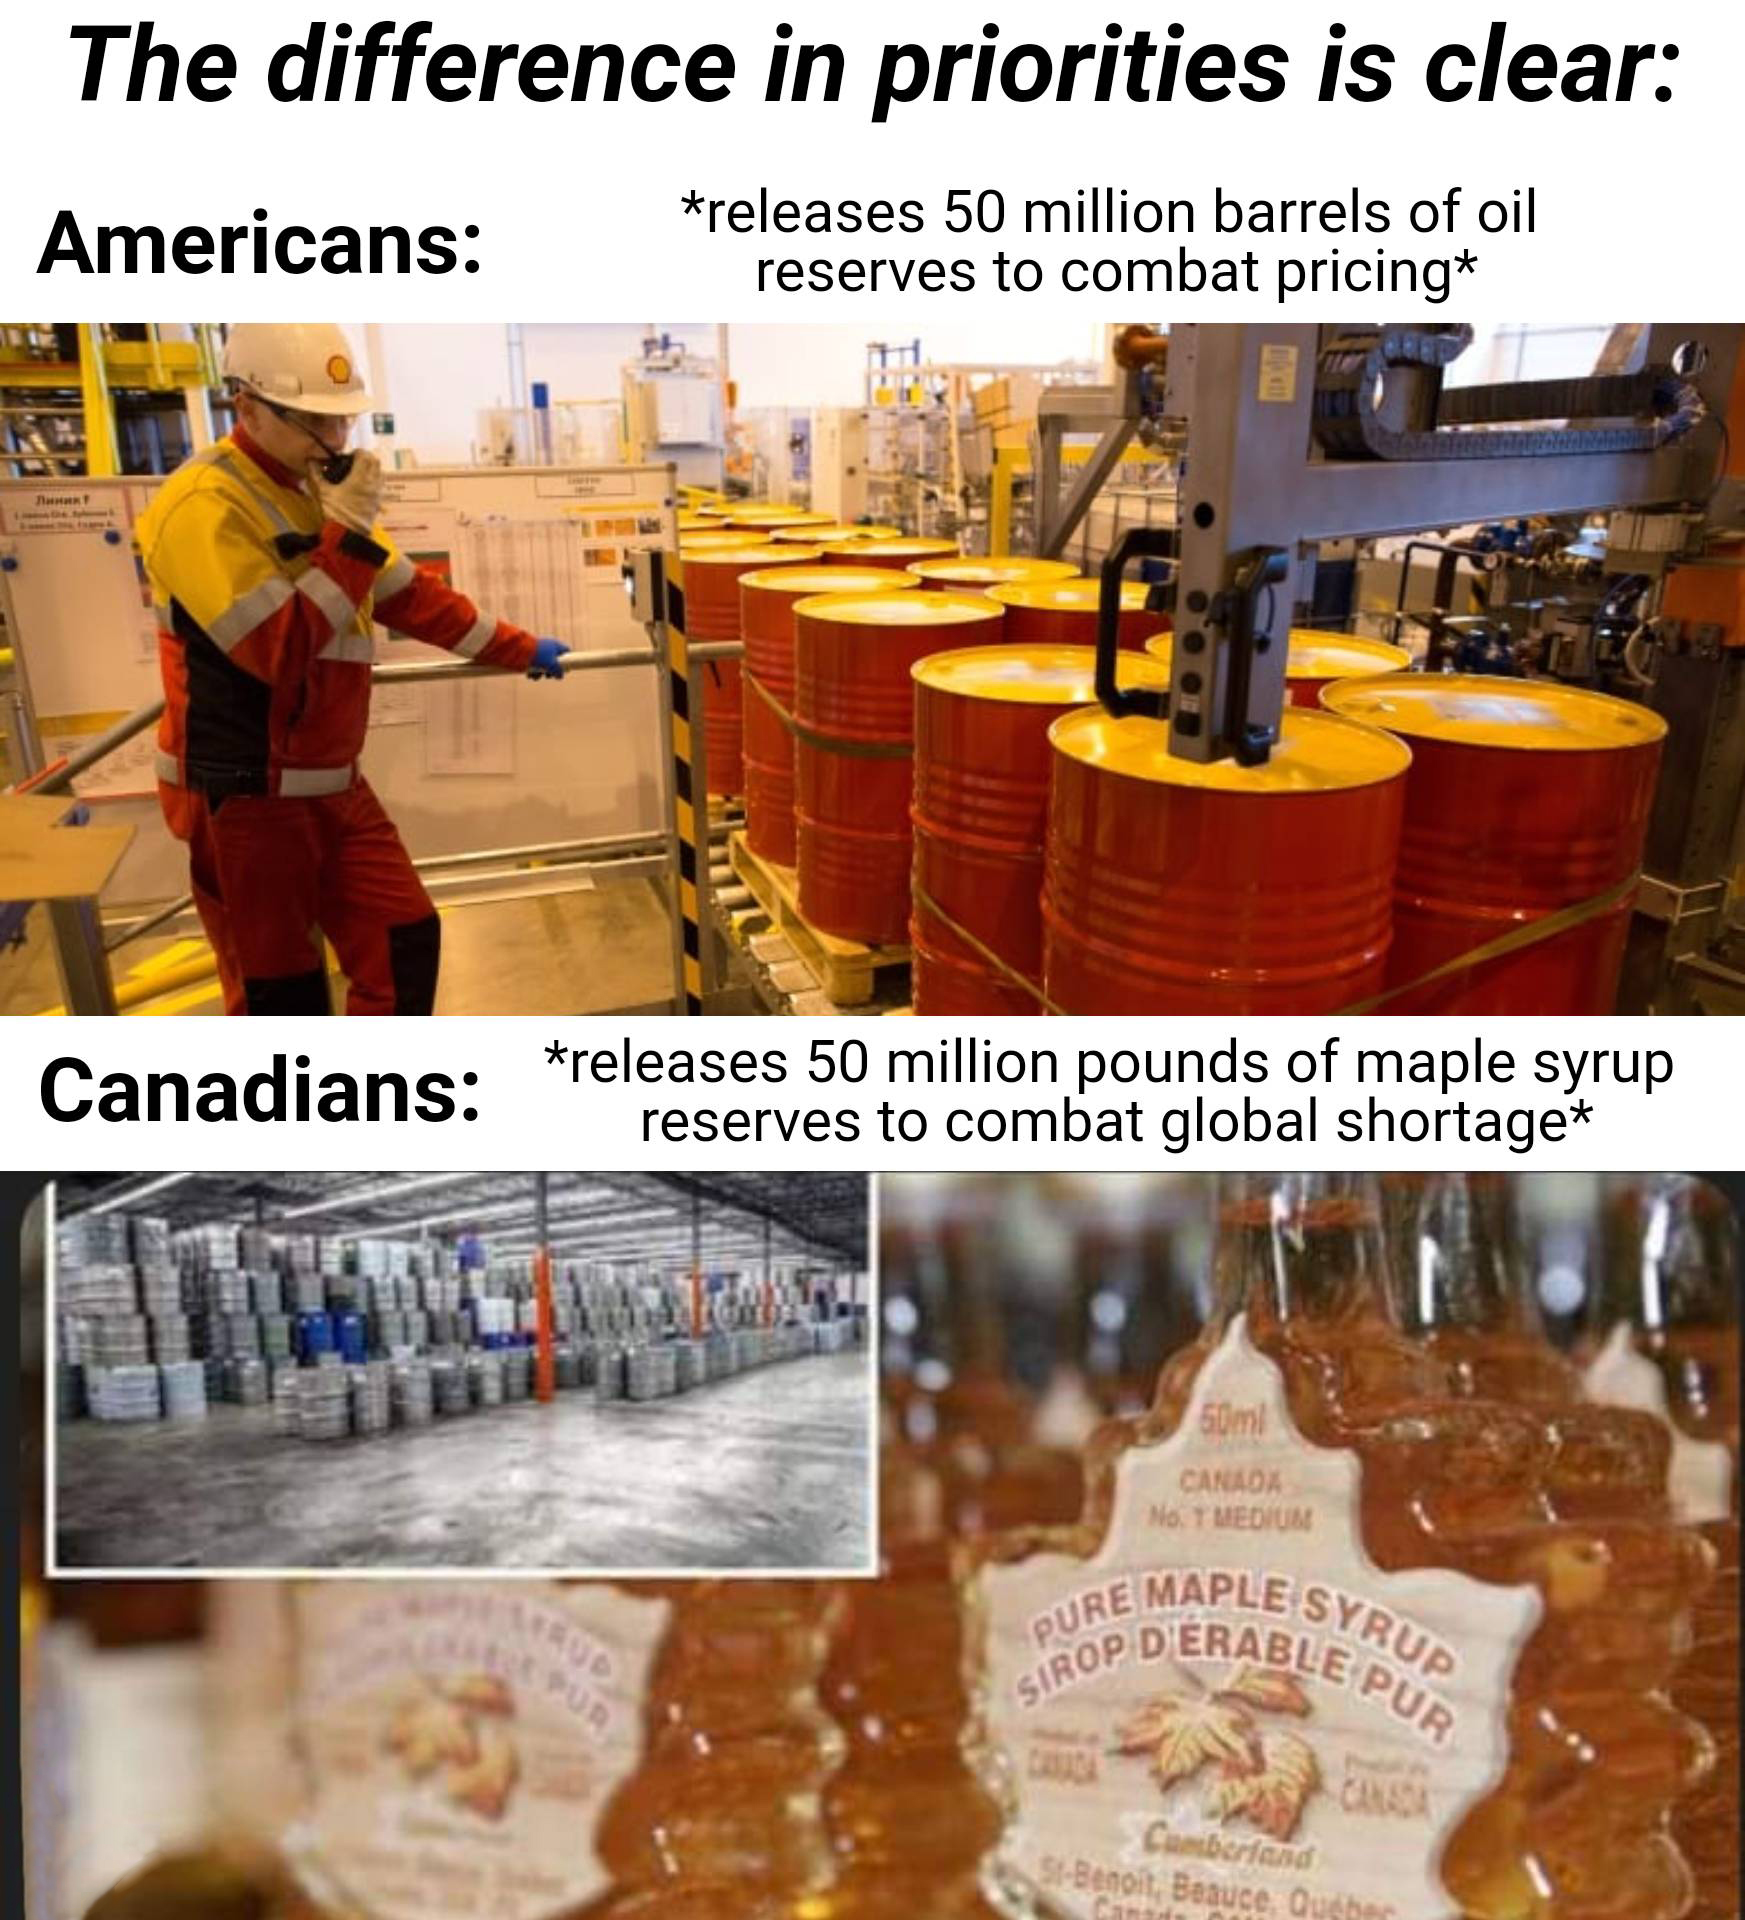 canada releases maple - The difference in priorities is clear Americans releases 50 million barrels of oil reserves to combat pricing Canadians releases 50 million pounds of maple syrup reserves to combat global shortage 50ml Canada No. Tmedium Pure Maple